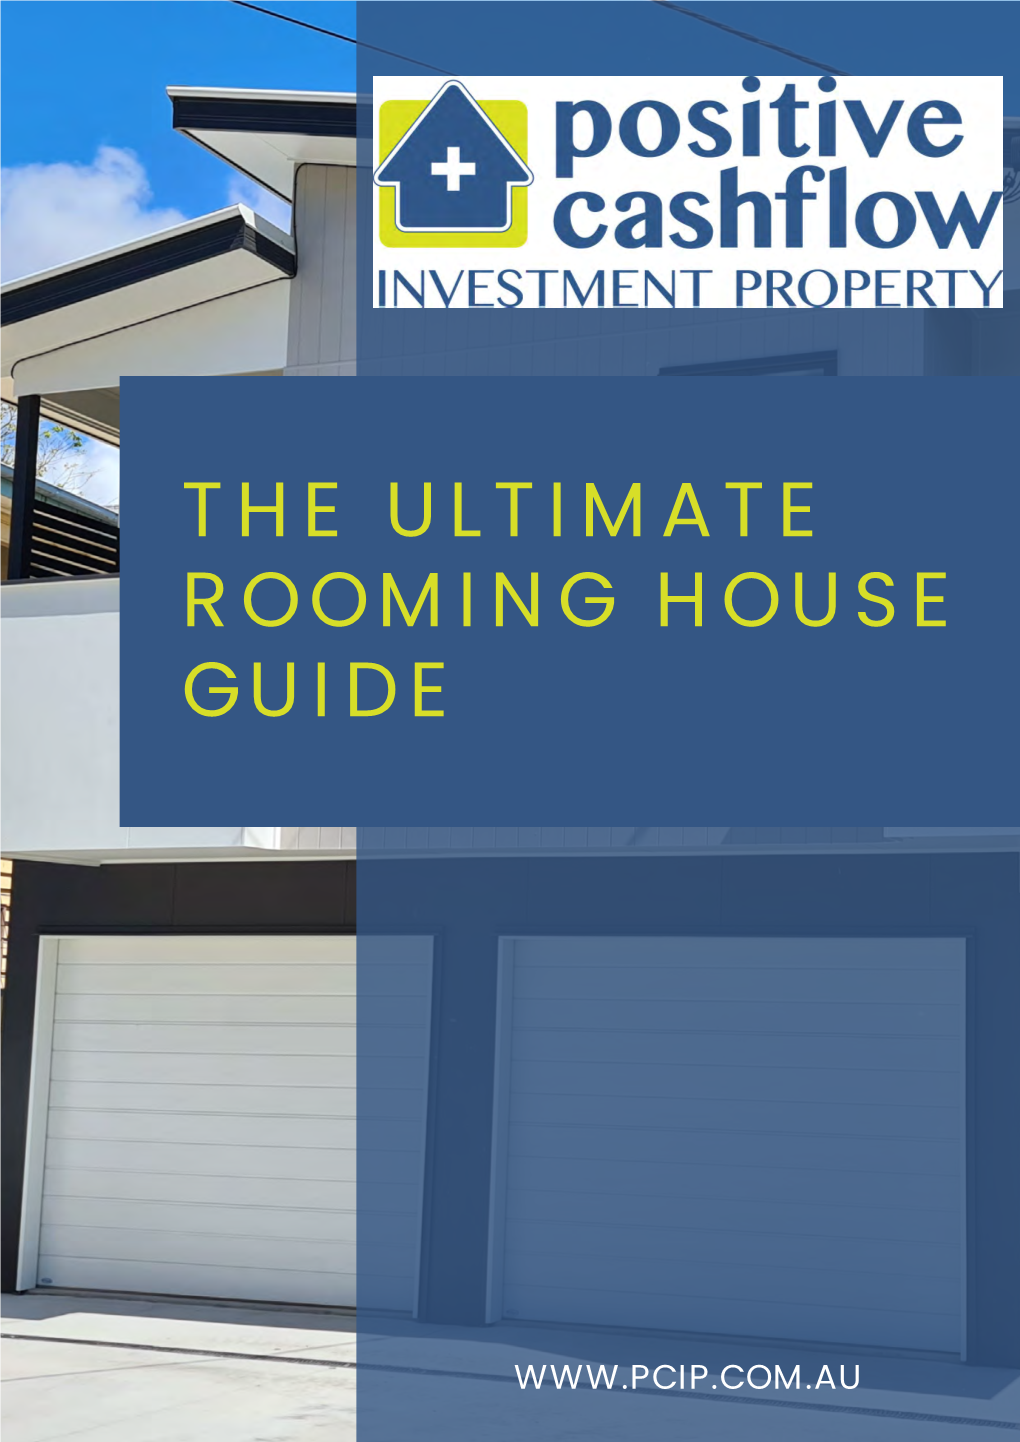 The Ultimate Rooming House Guide